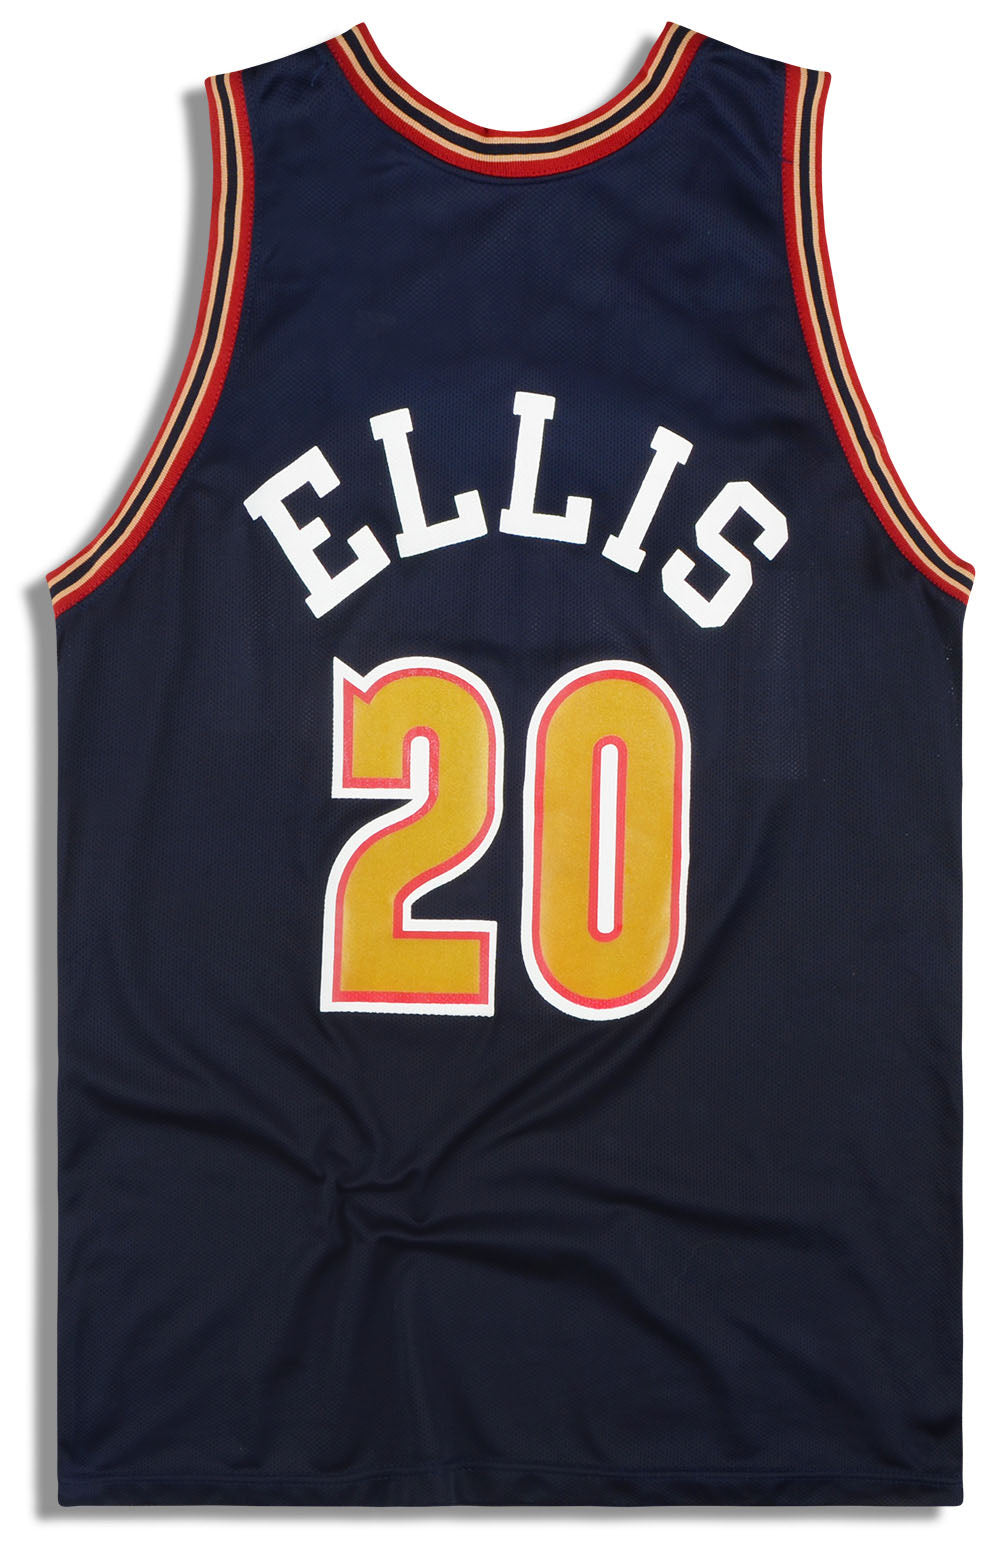 AGR Authentic Jersey of the Week(end): LaPhonso Ellis on the